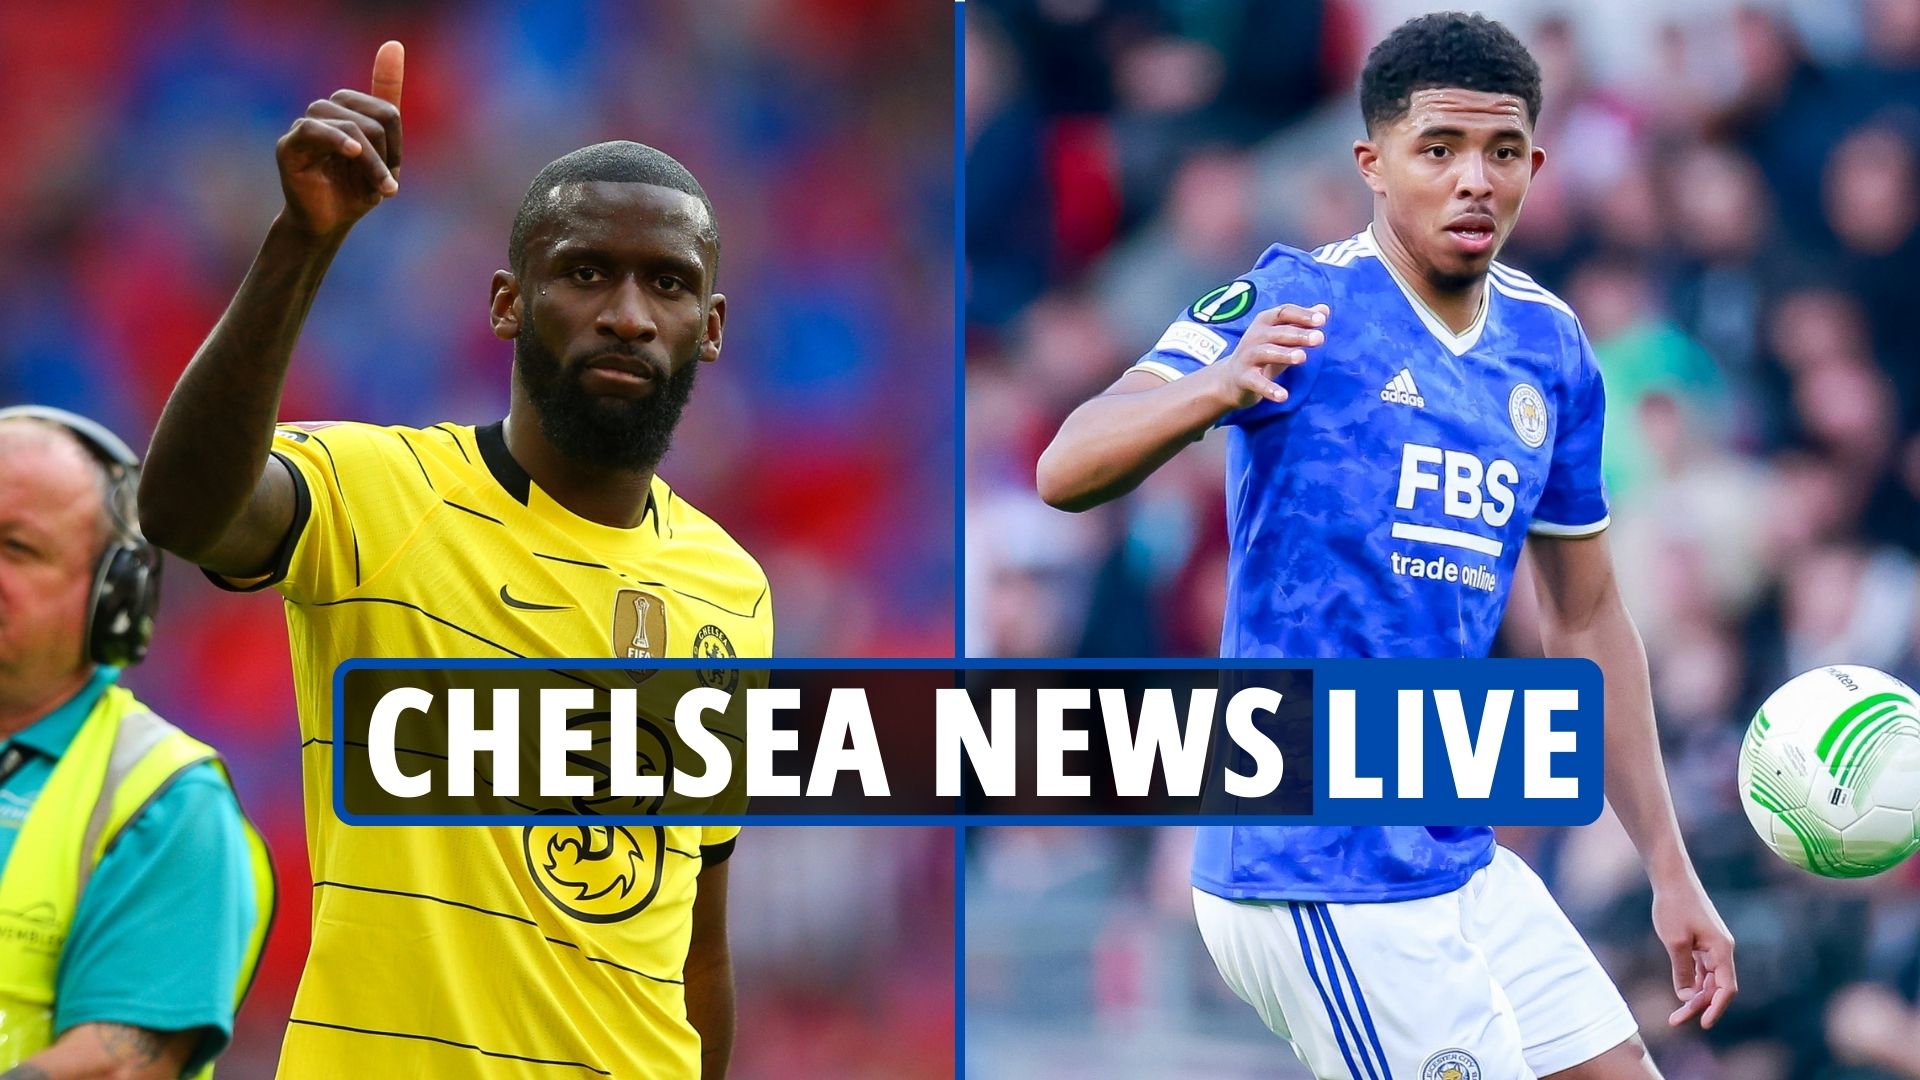 Chelsea news LIVE: latest transfer gossip and takeover news from Stamford Bridge